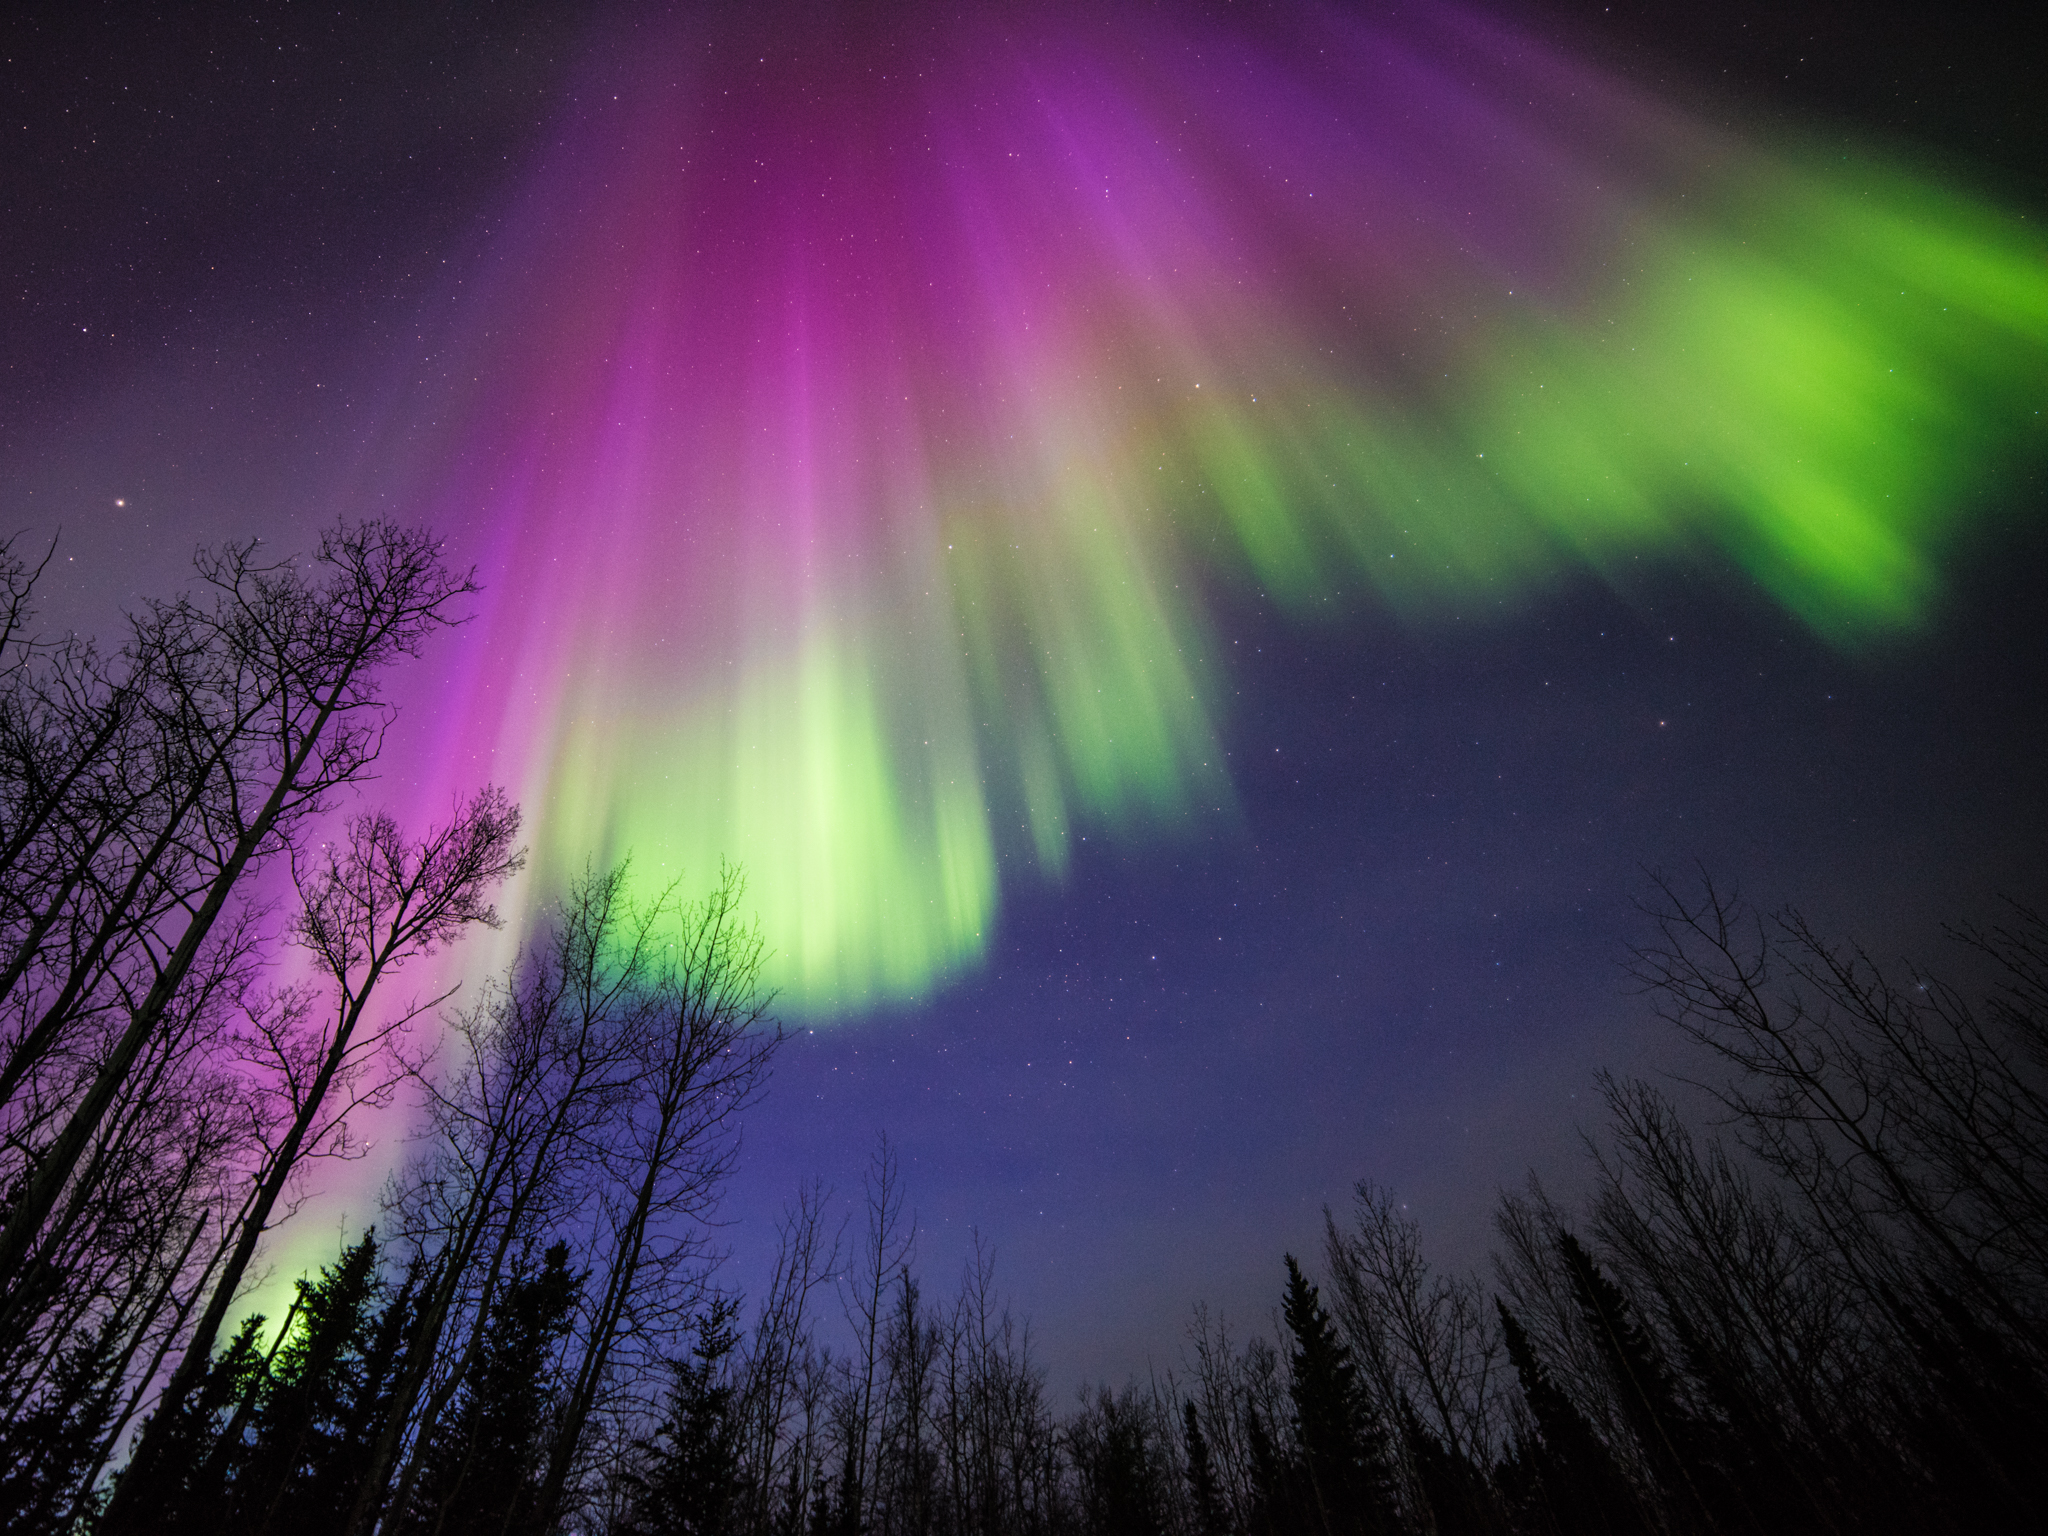 Curtains of green, pink, and purple aurora shimmer in the night sky above the treetops.